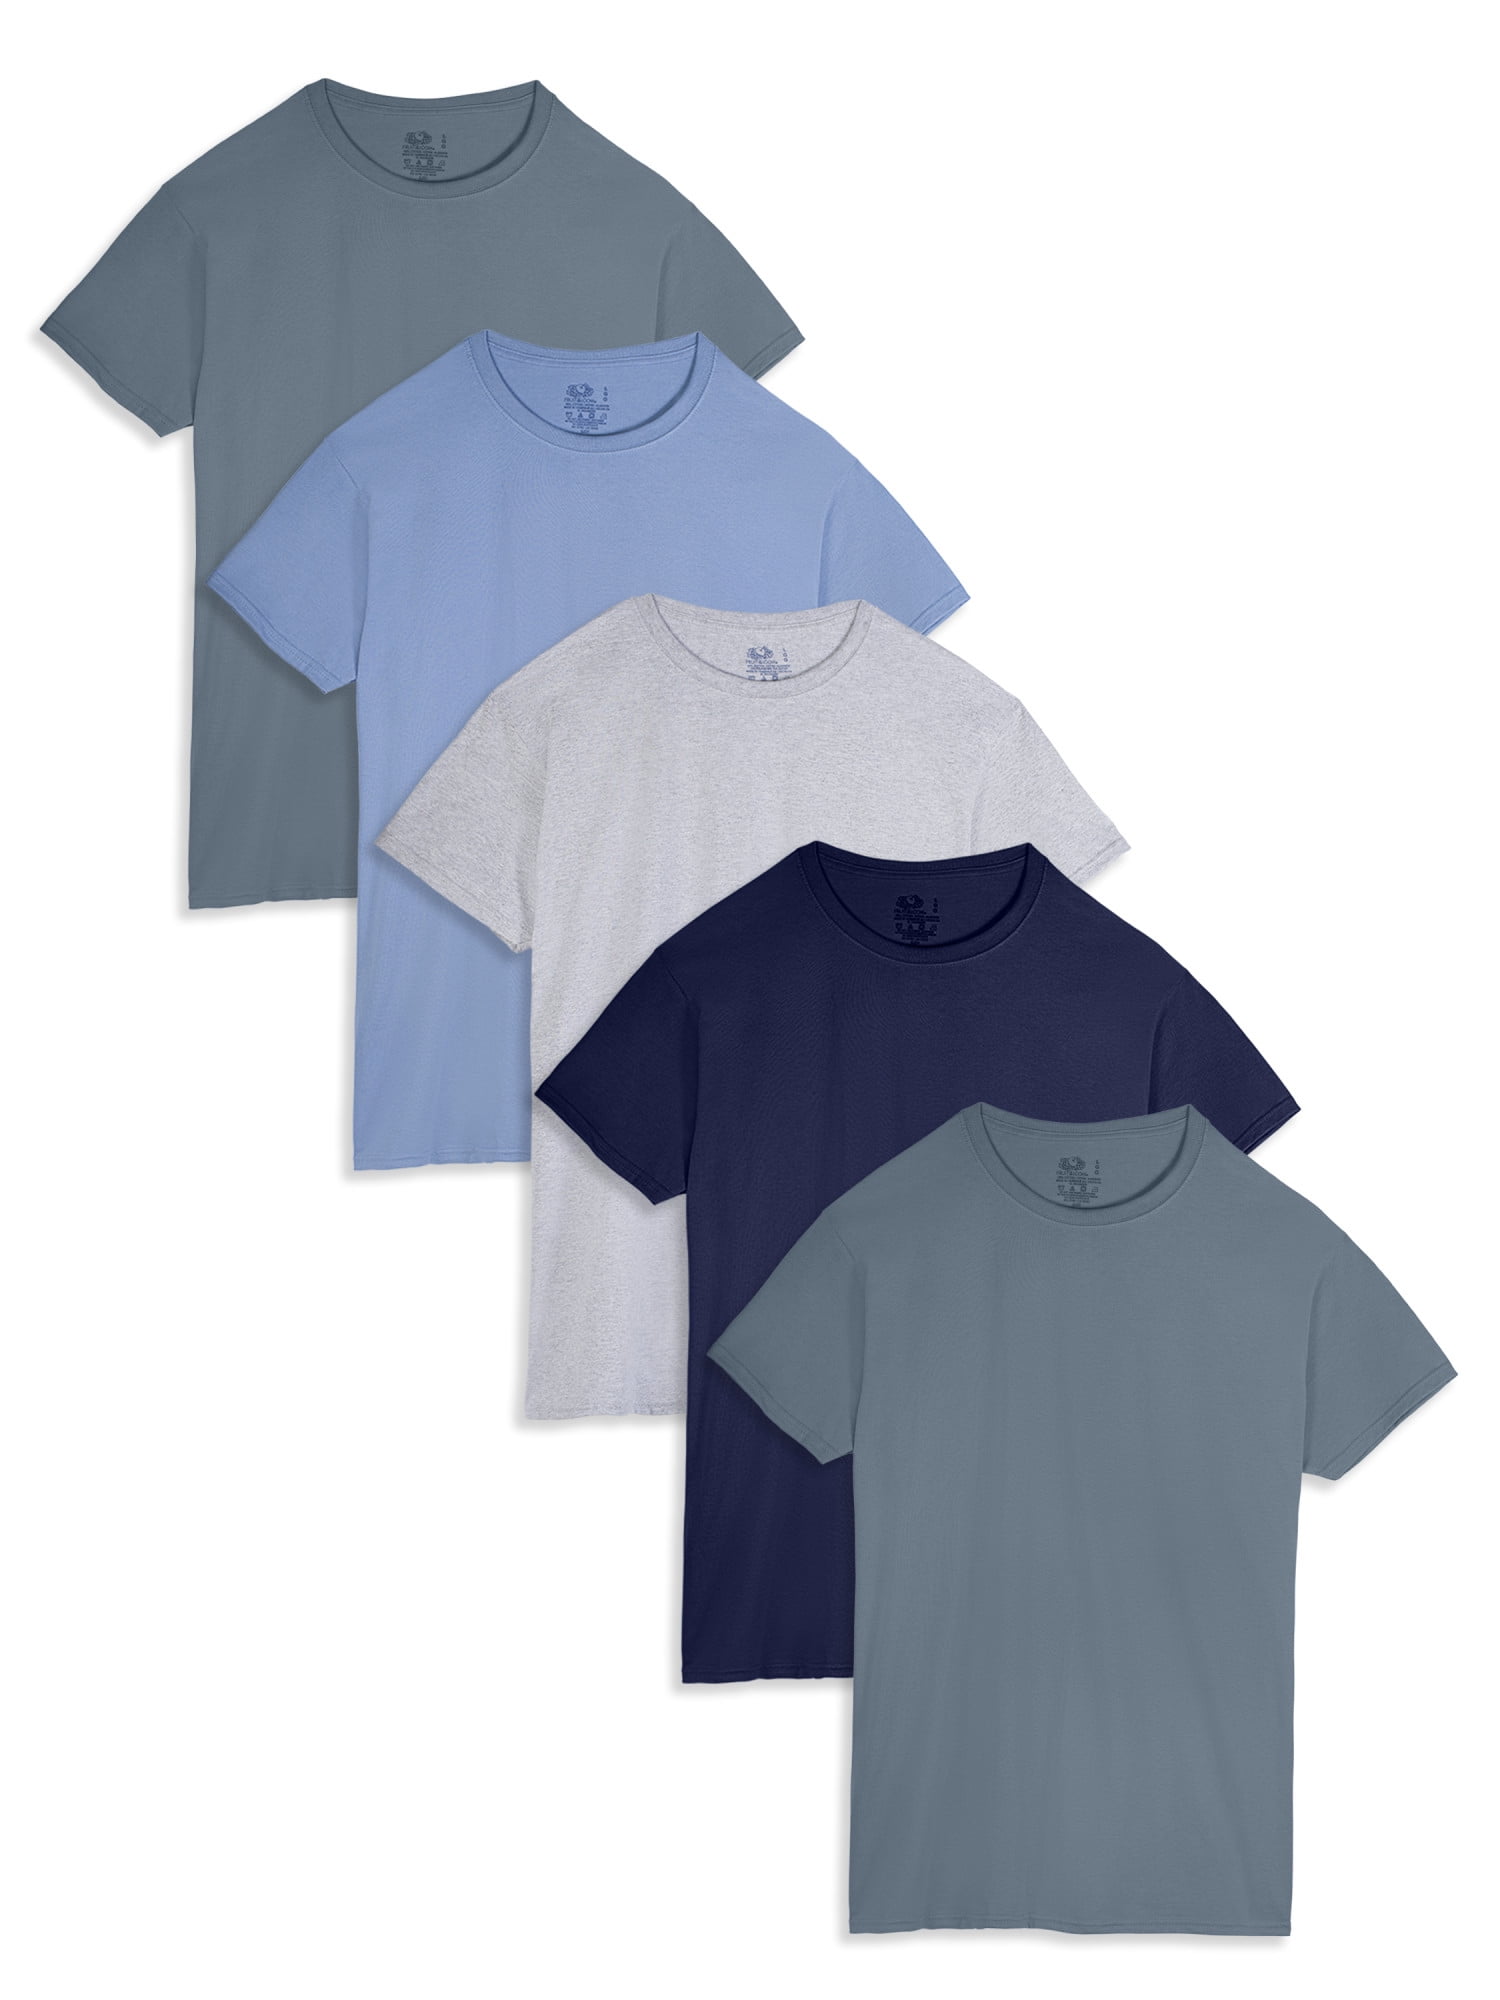 3 Or 5 Pack Fruit of the Loom Kids Half sleeves Cotton Value-weight T Shirt New 